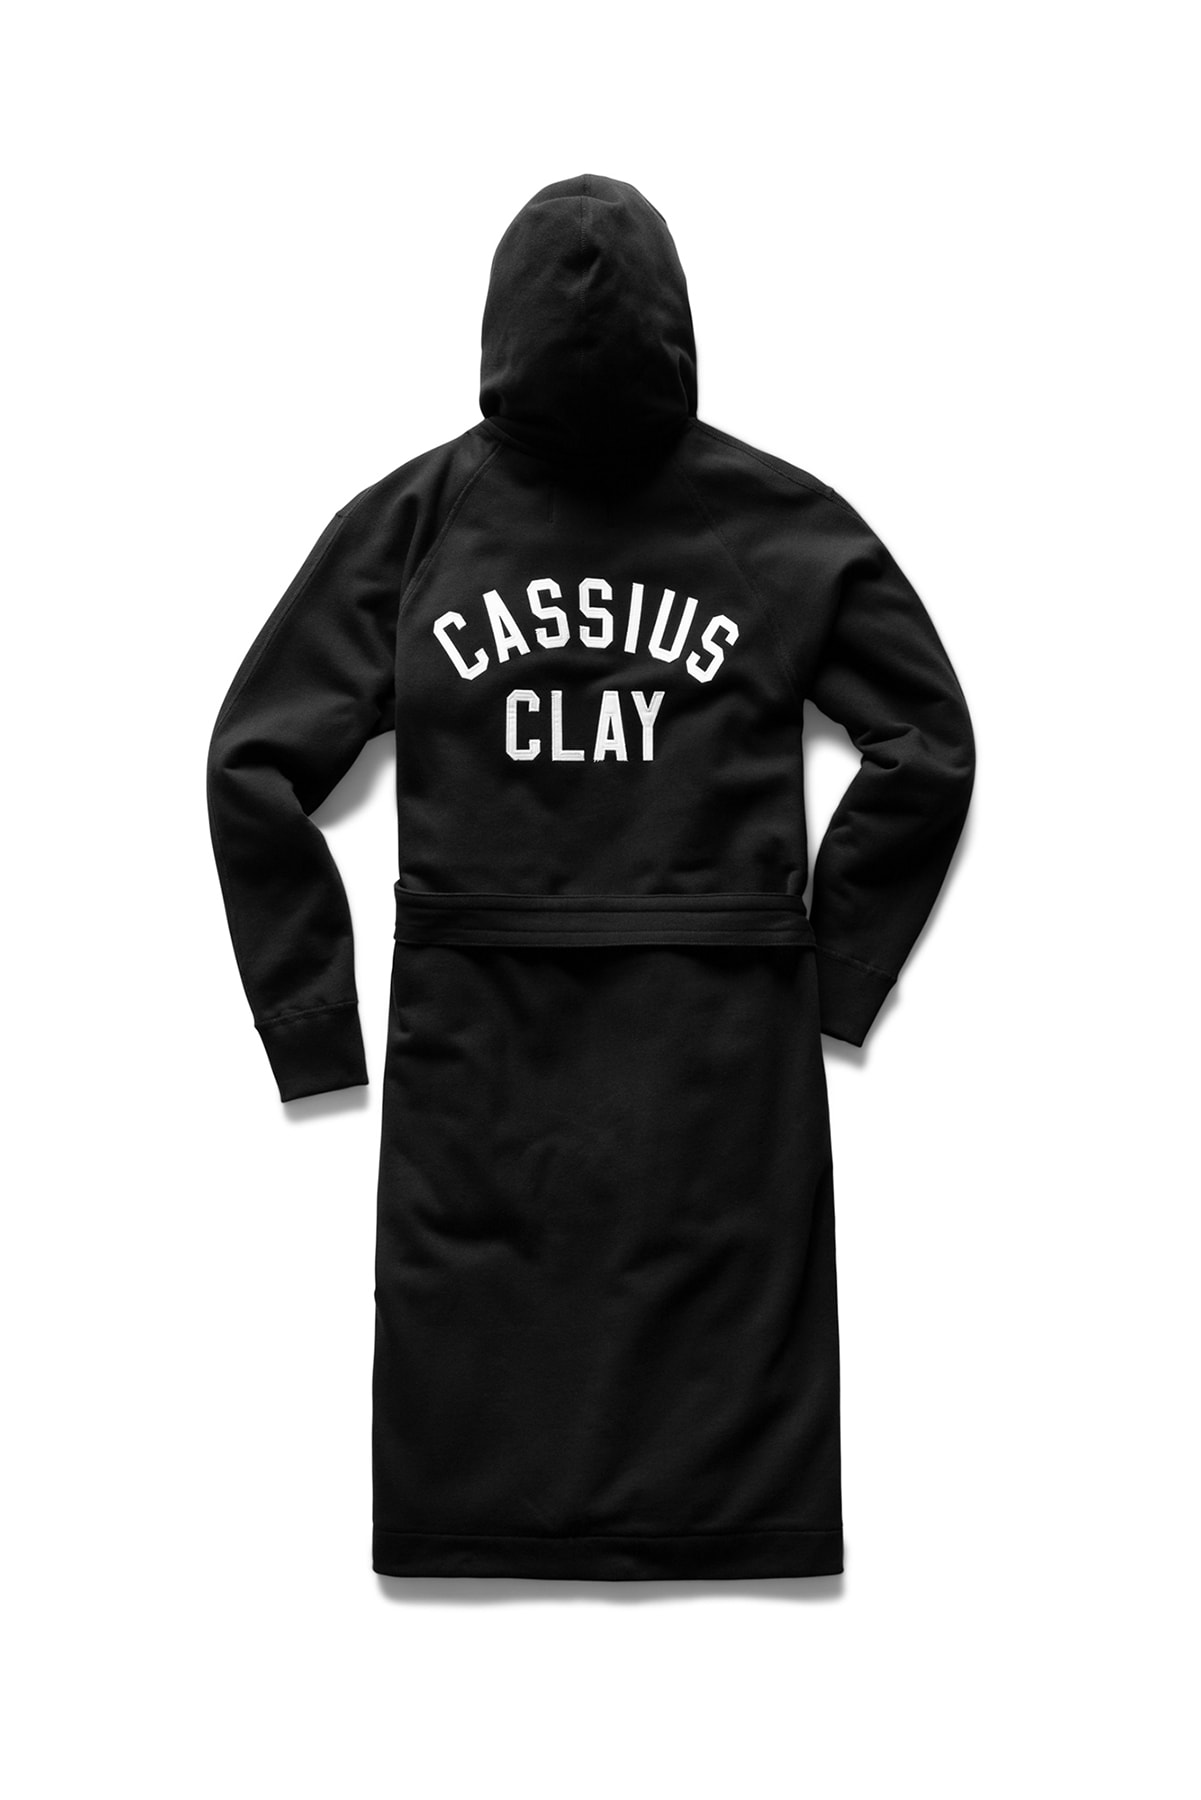 muhammad ali cassius clay reigning champ collaboration august 2 2018 black robe